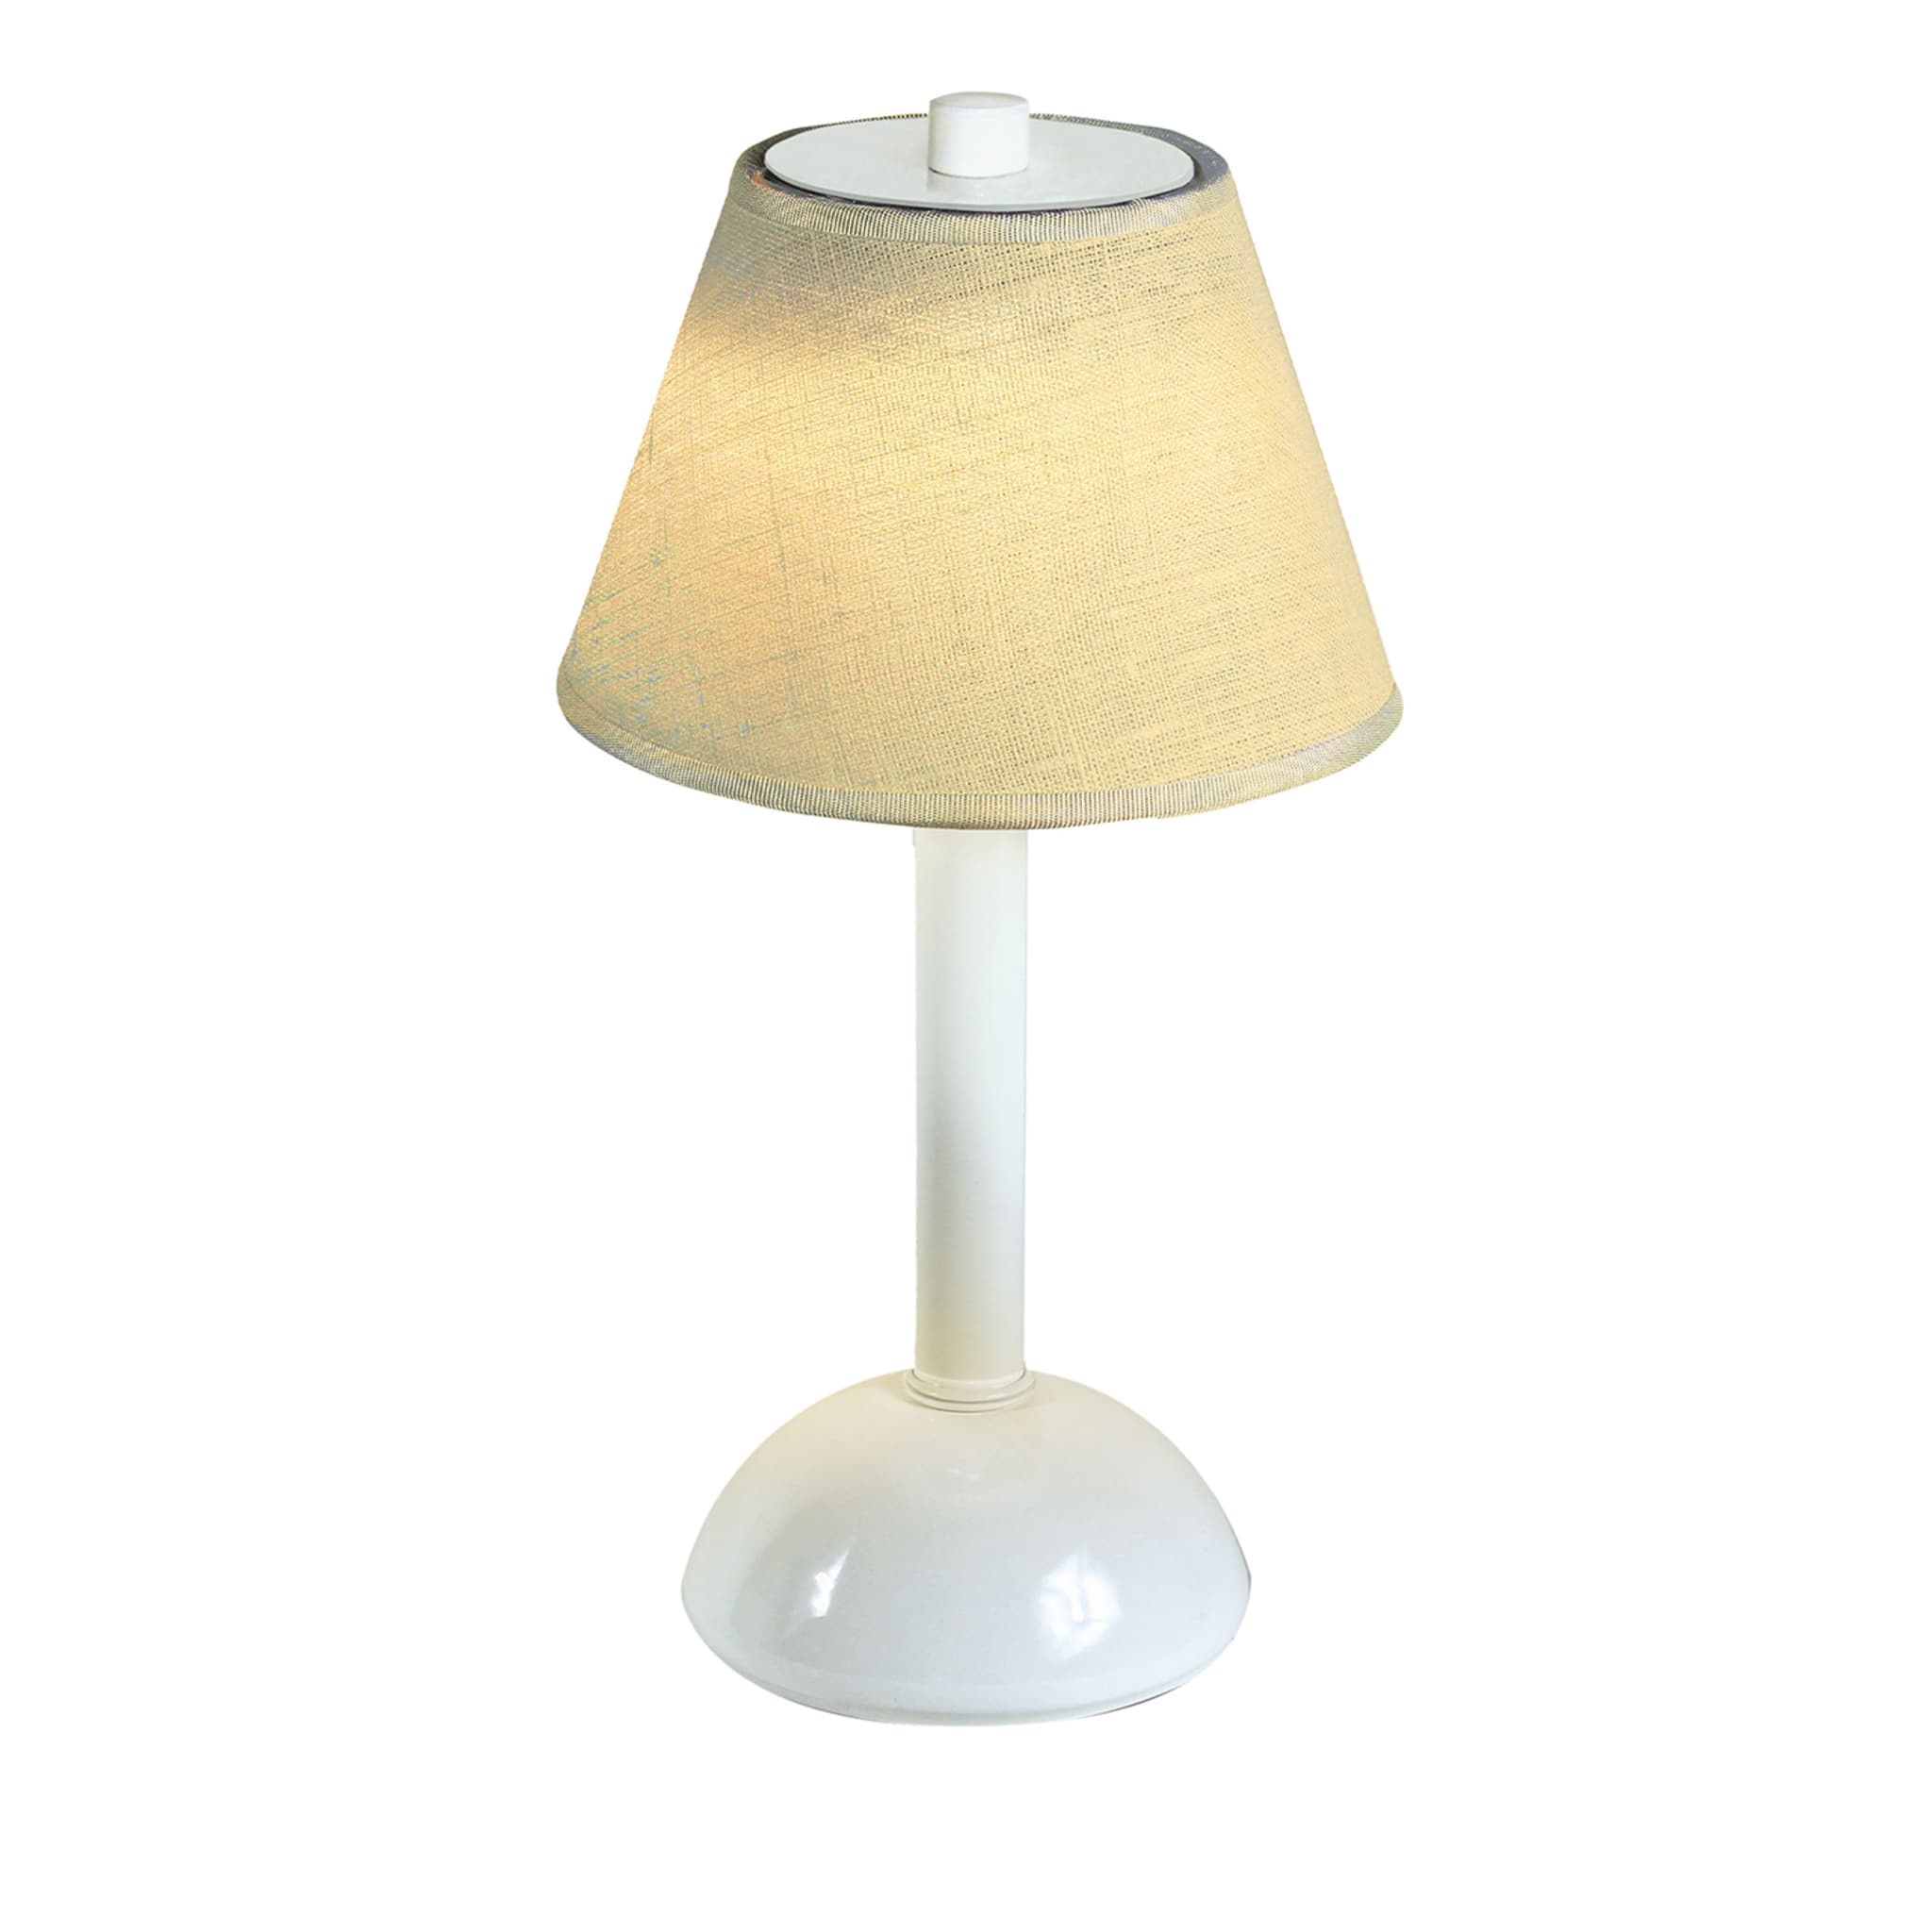 Moon Ivory Linen White Table Lamp by Stefano Tabarin - Main view